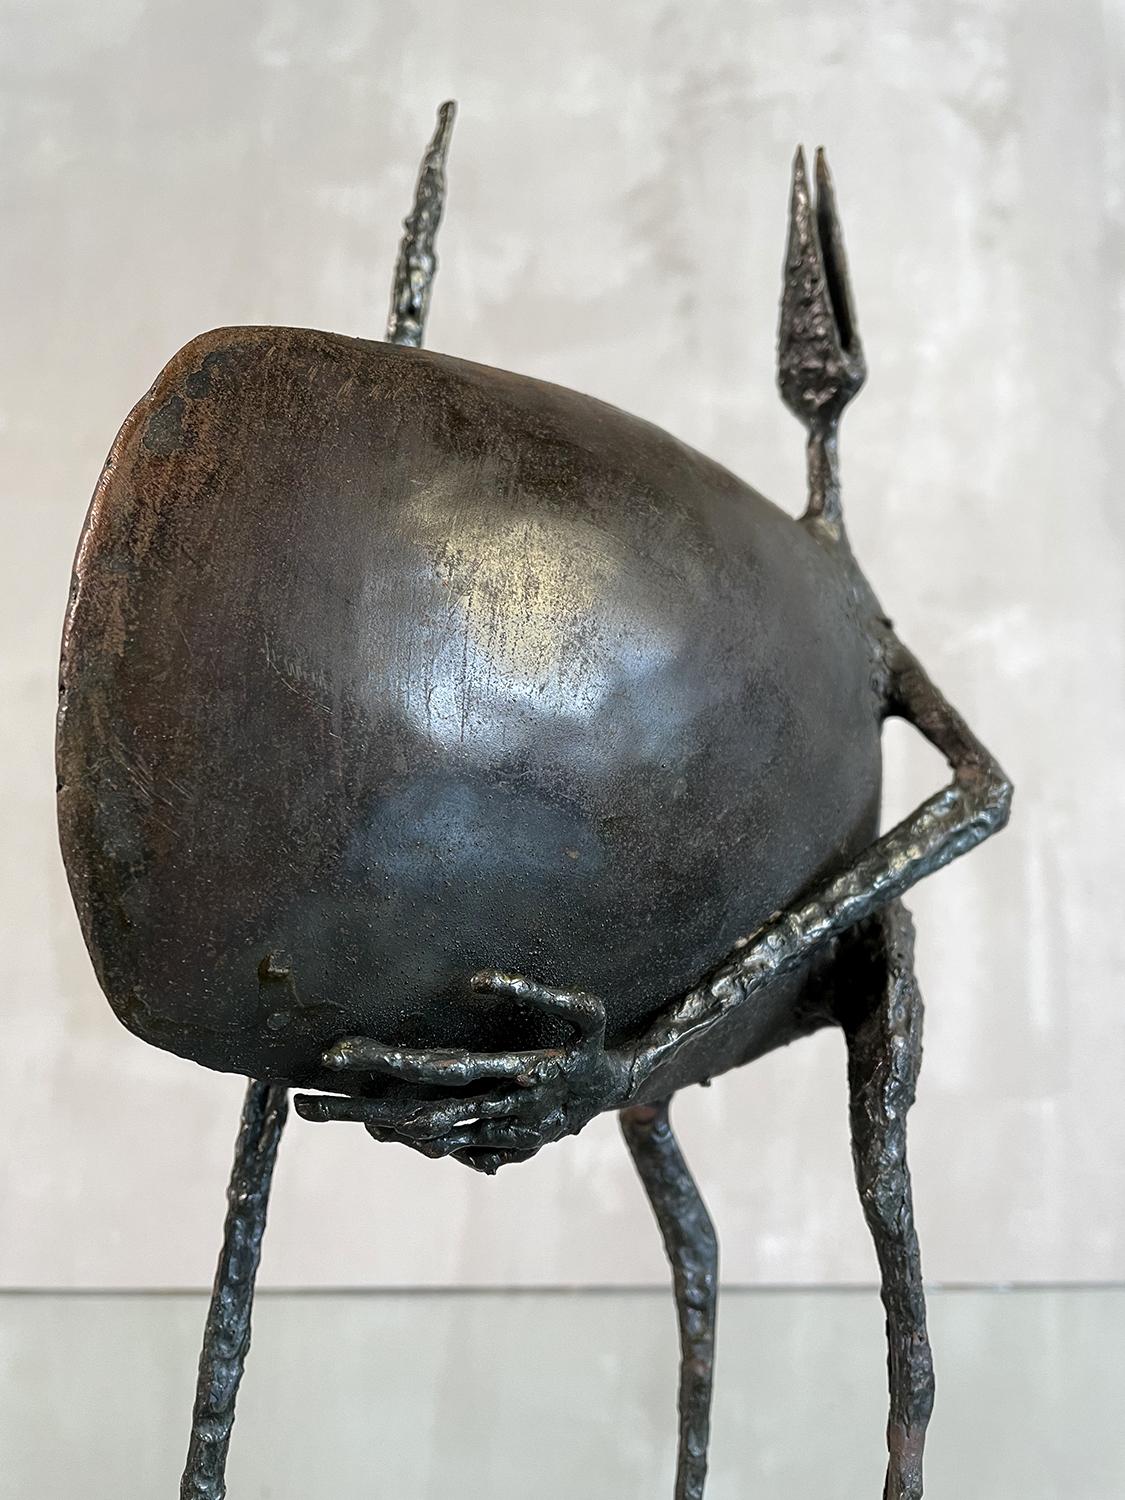 Michel Anasse (1935-2020), welded iron sculpture from the 